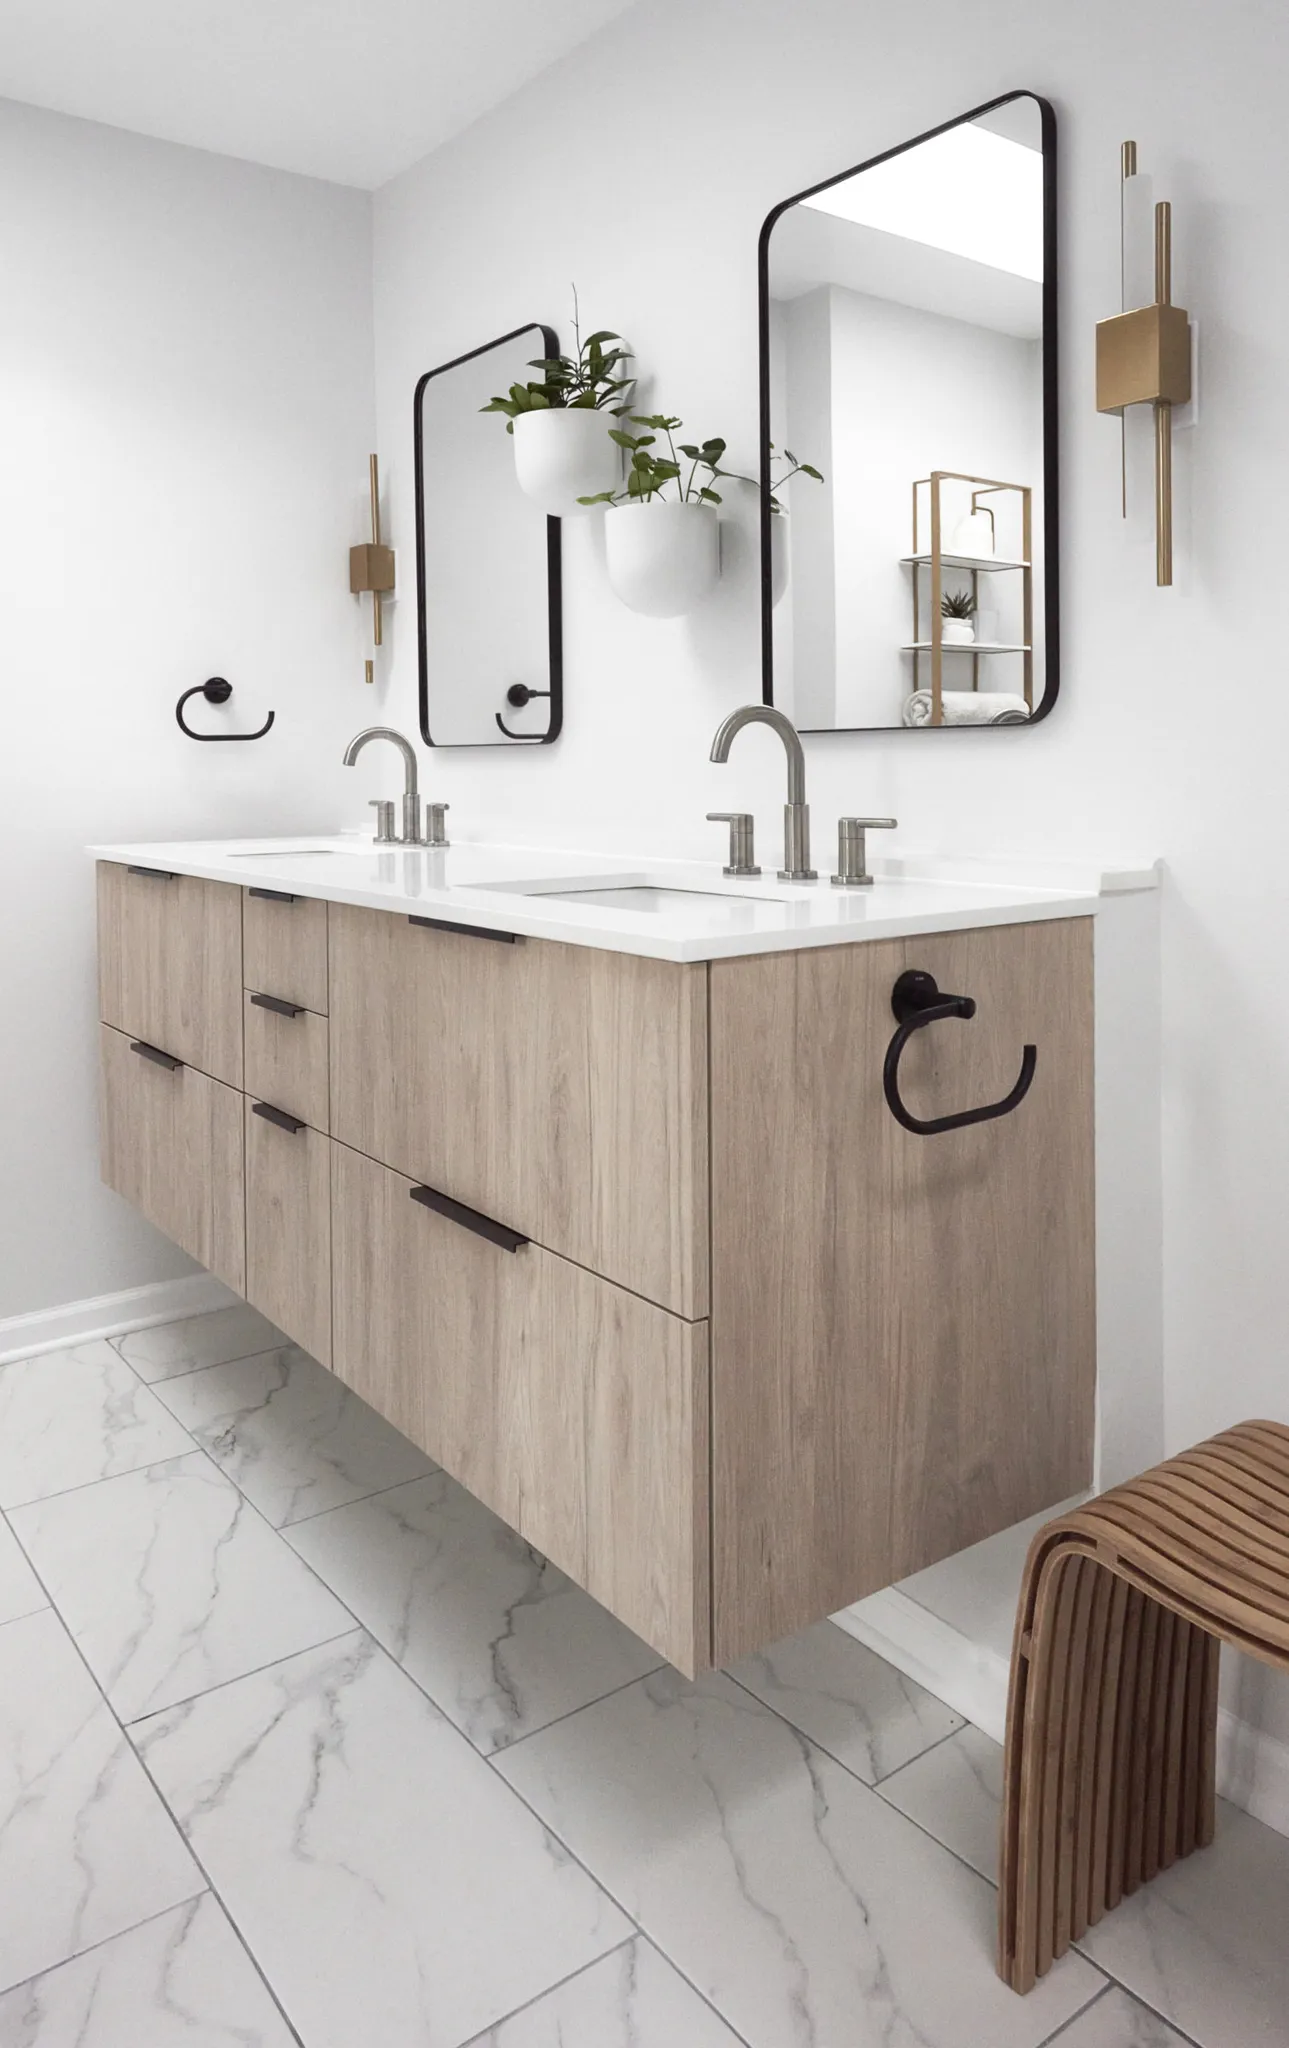 Bright bathroom with floating double sink vanity and light wood cabinets